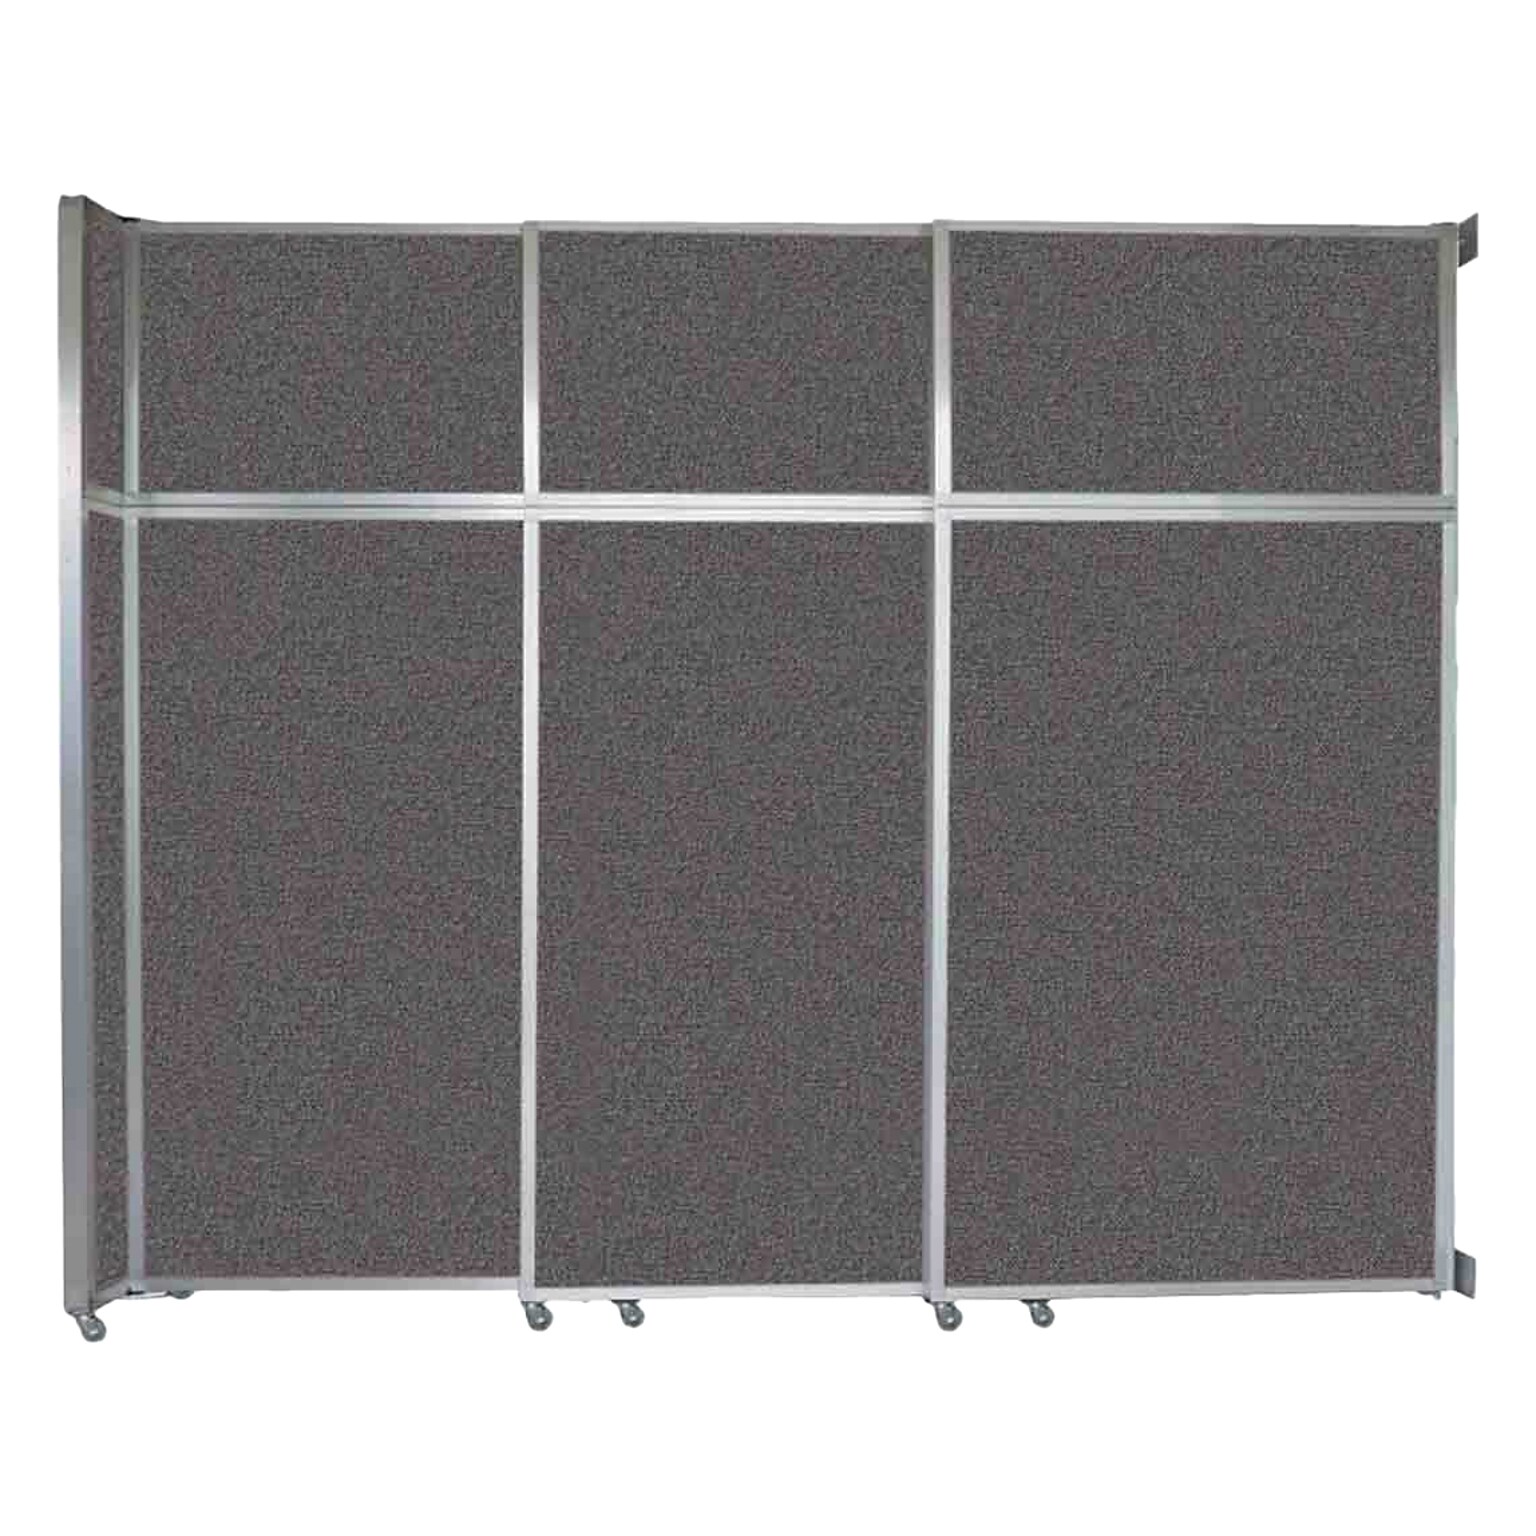 Versare Operable Wall Clamp Mount Sliding Room Divider, 101.25H x 117W, Charcoal Gray Fabric (1072307)